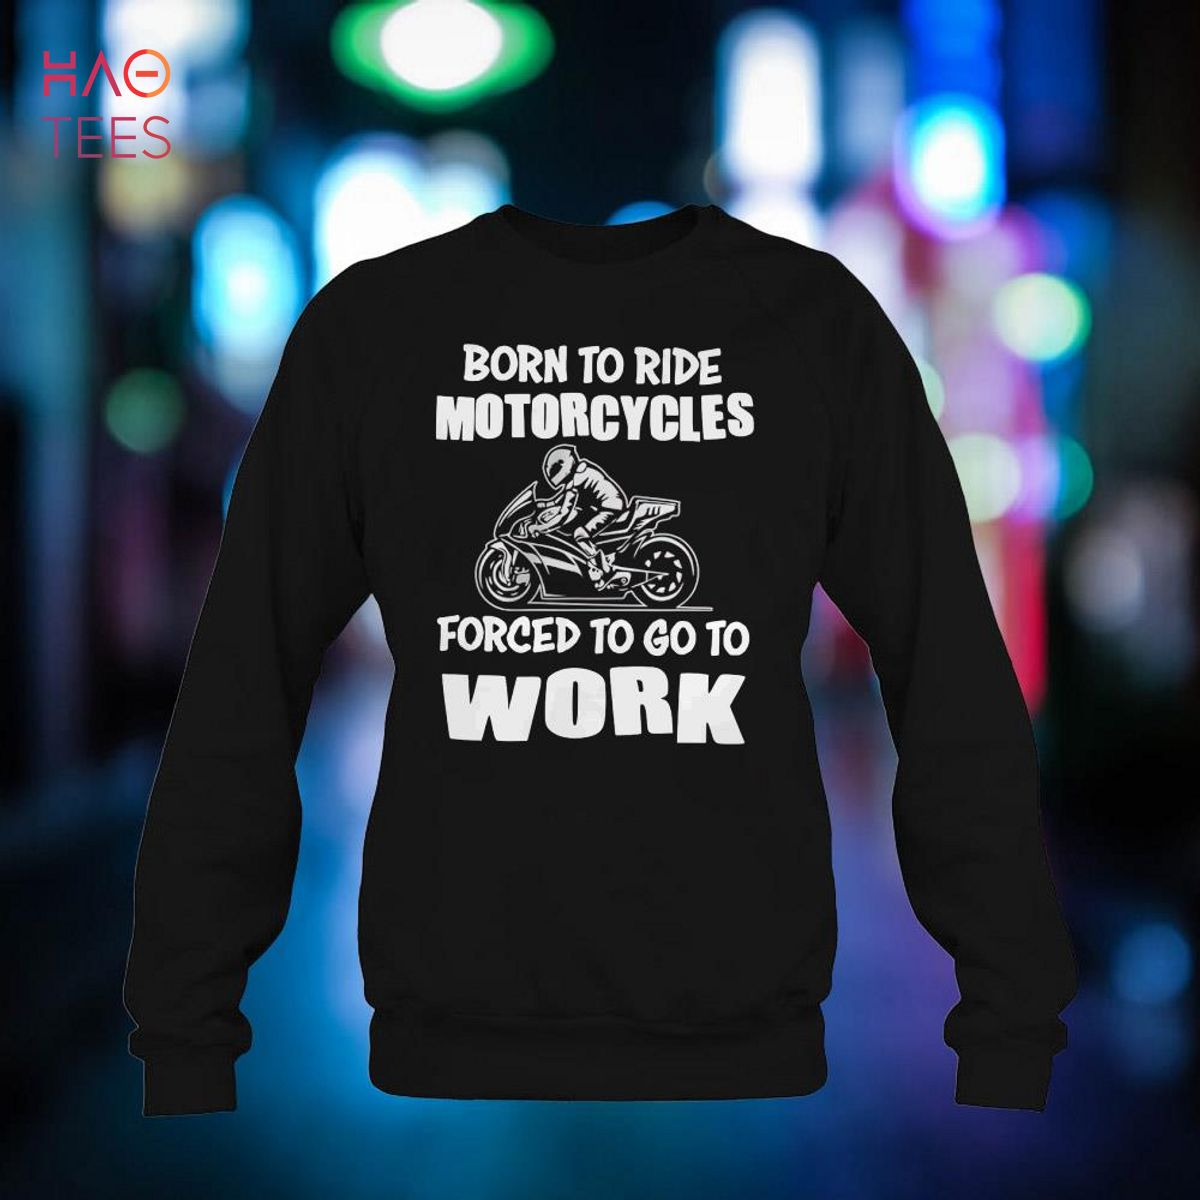 Born To Ride - Forced To Work T-Shirt